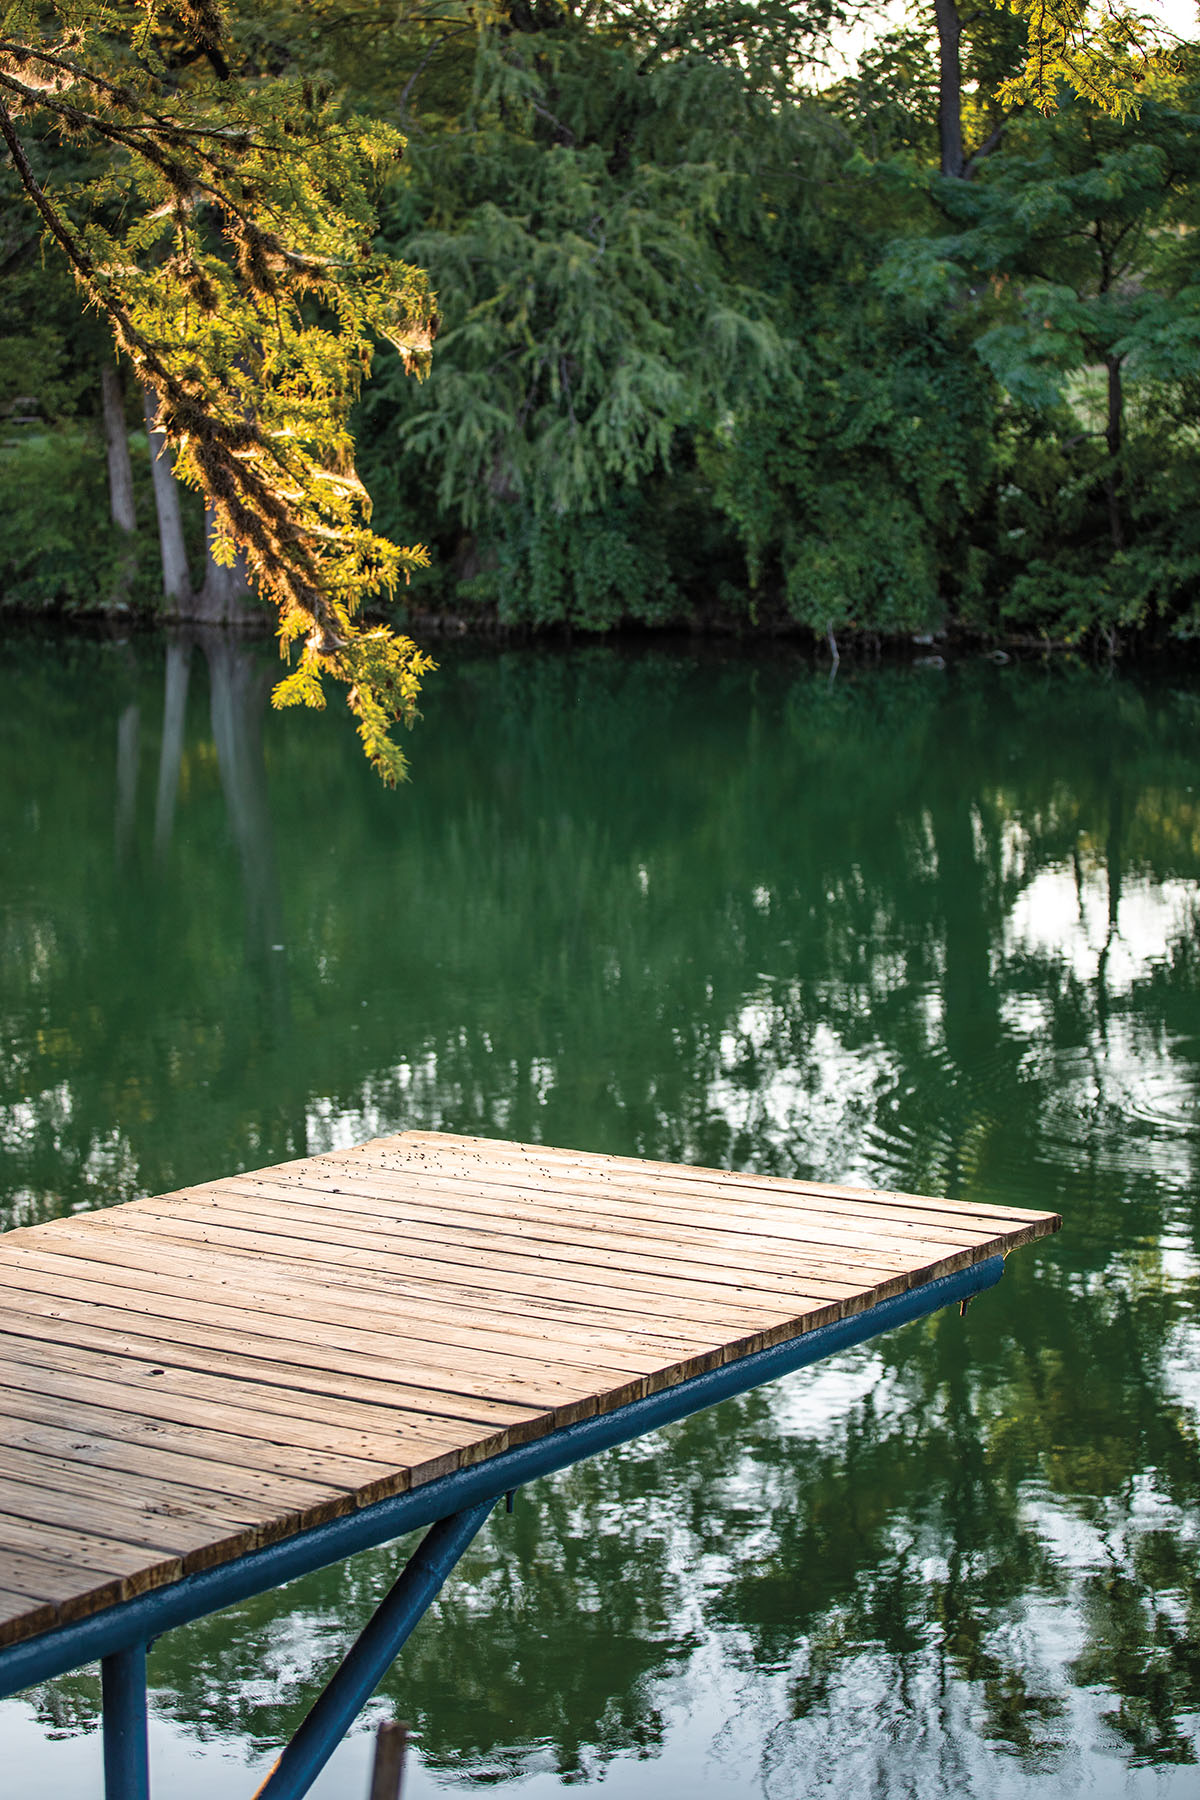 Golden tree branches hang over crystal-clear blue green water and a wooden dock